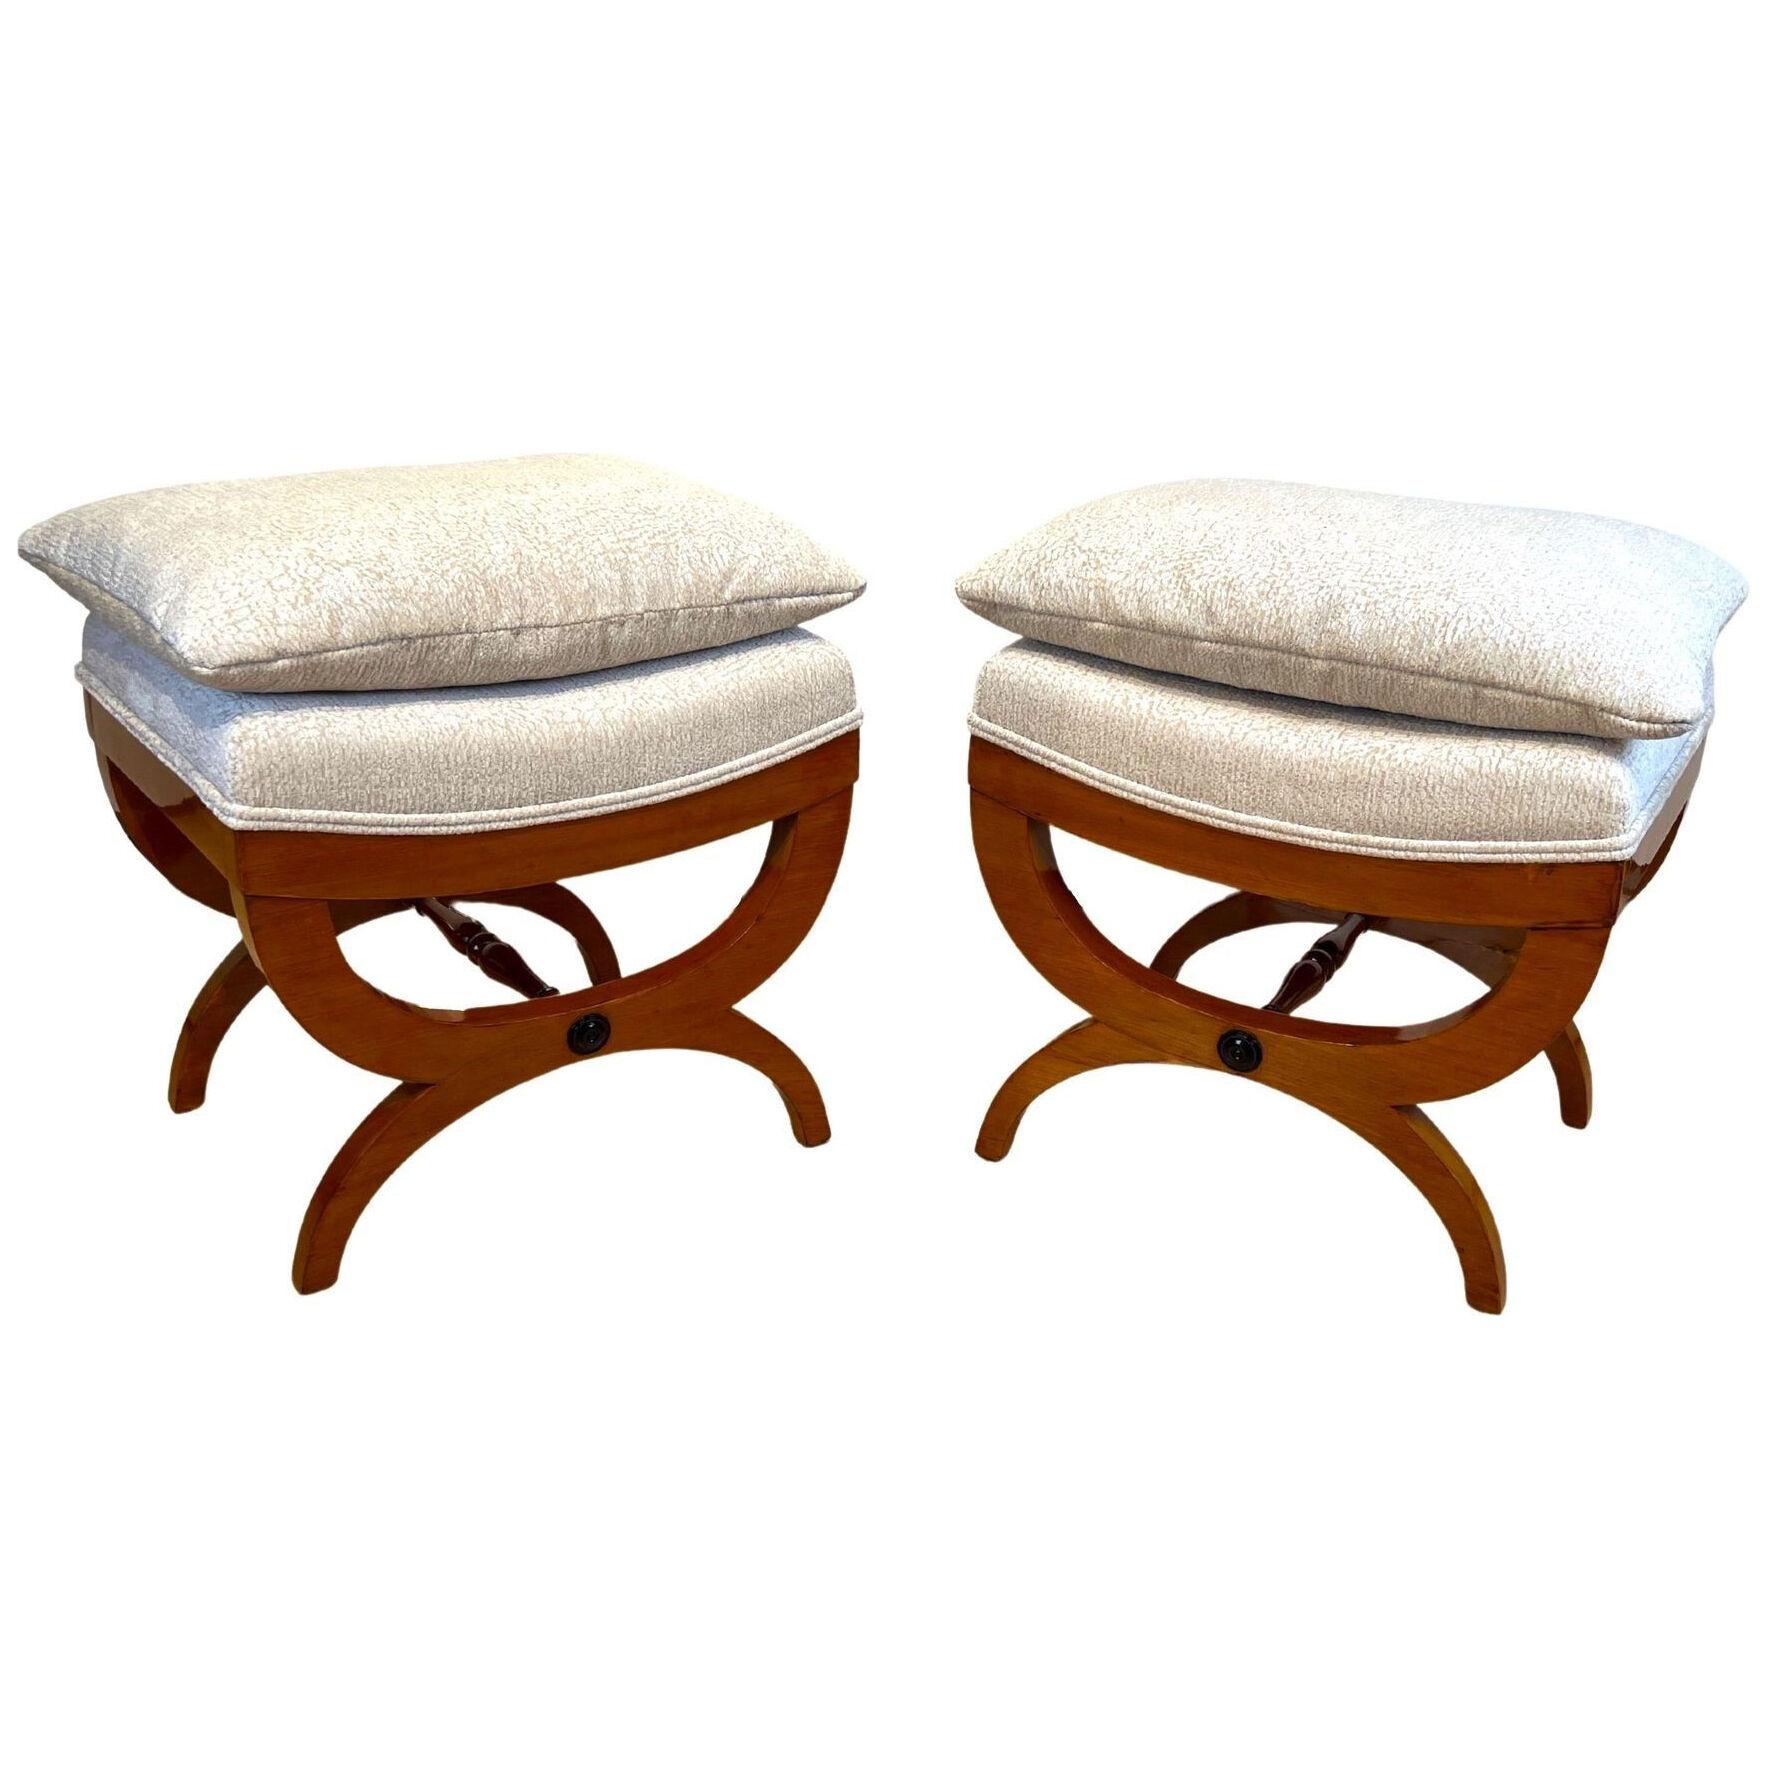 Pair of large Tabourets, Beech wood, France circa 1860